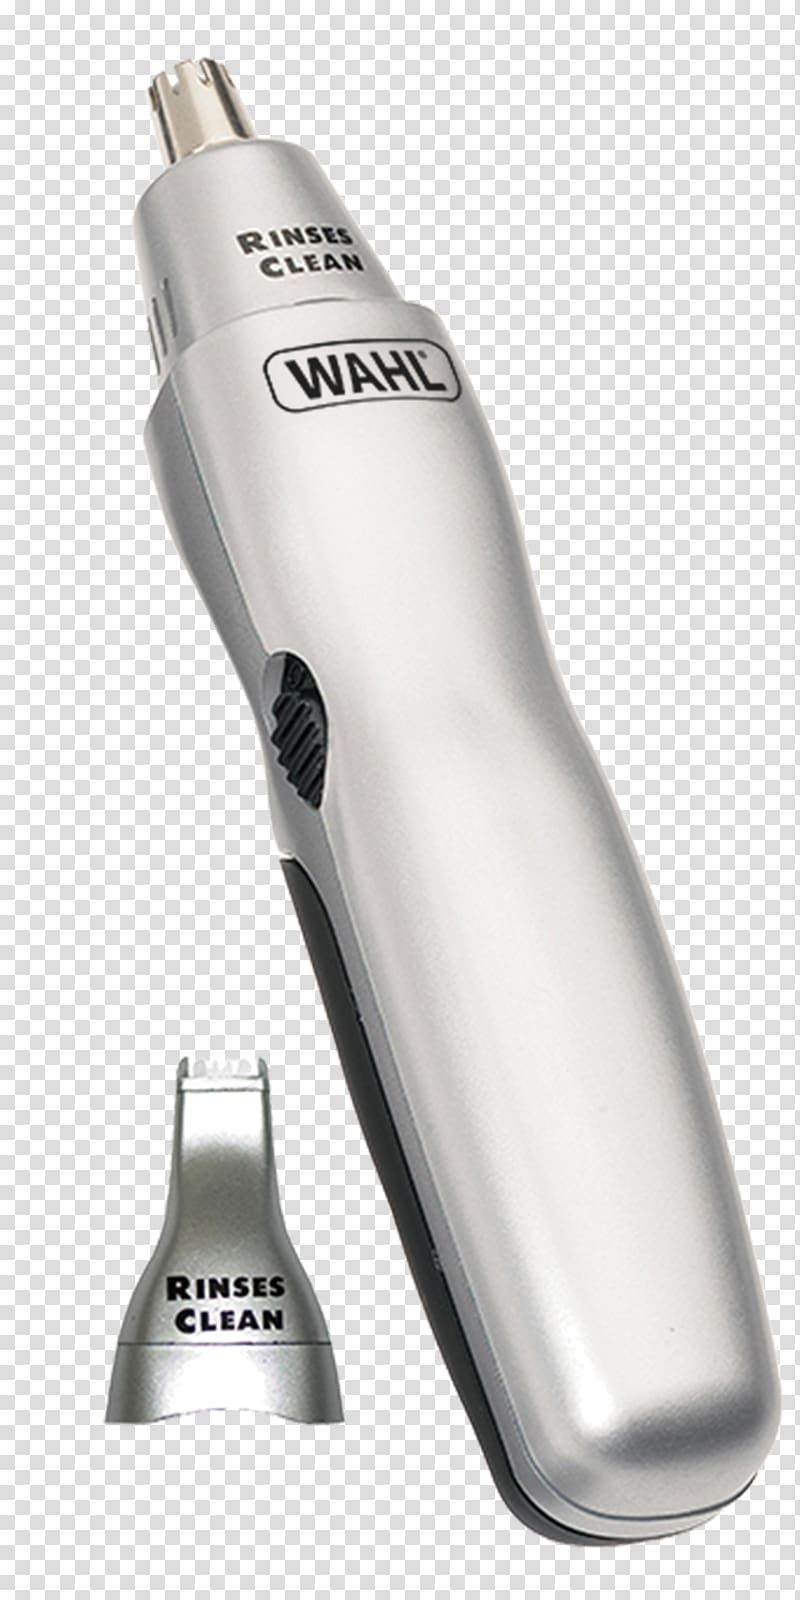 Hair clipper Wahl Clipper Electric Razors & Hair Trimmers Wahl 3 in 1 Trimmer 5545-400 Wahl GroomsMan Pro, others transparent background PNG clipart